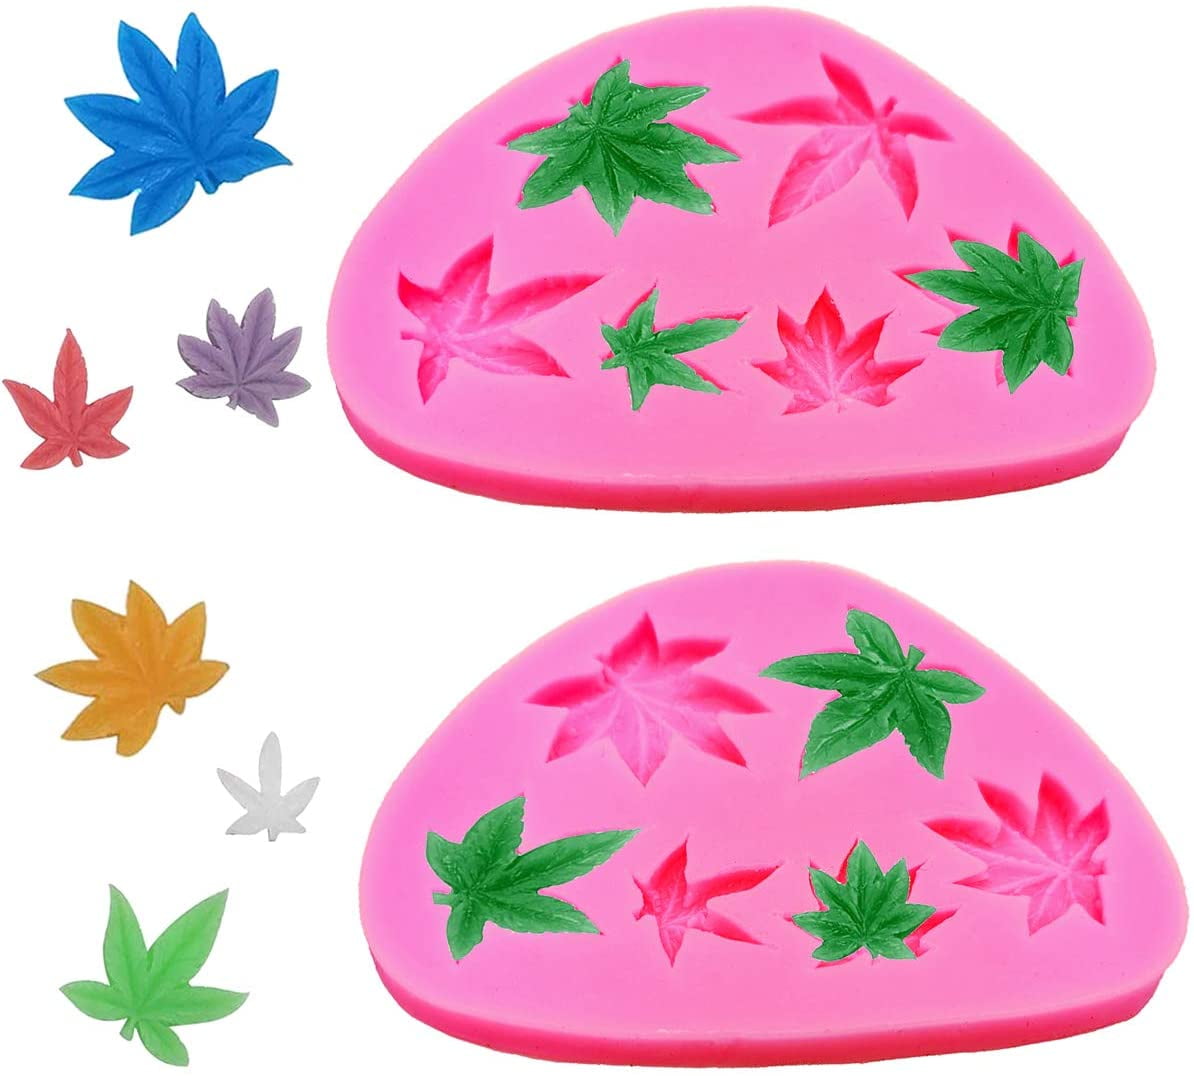 CANNABIS WEED MARIJUANA LEAF SHAPE ICE CUBE MAKER TRAY MOULD MOLD SILICONE DRINK 